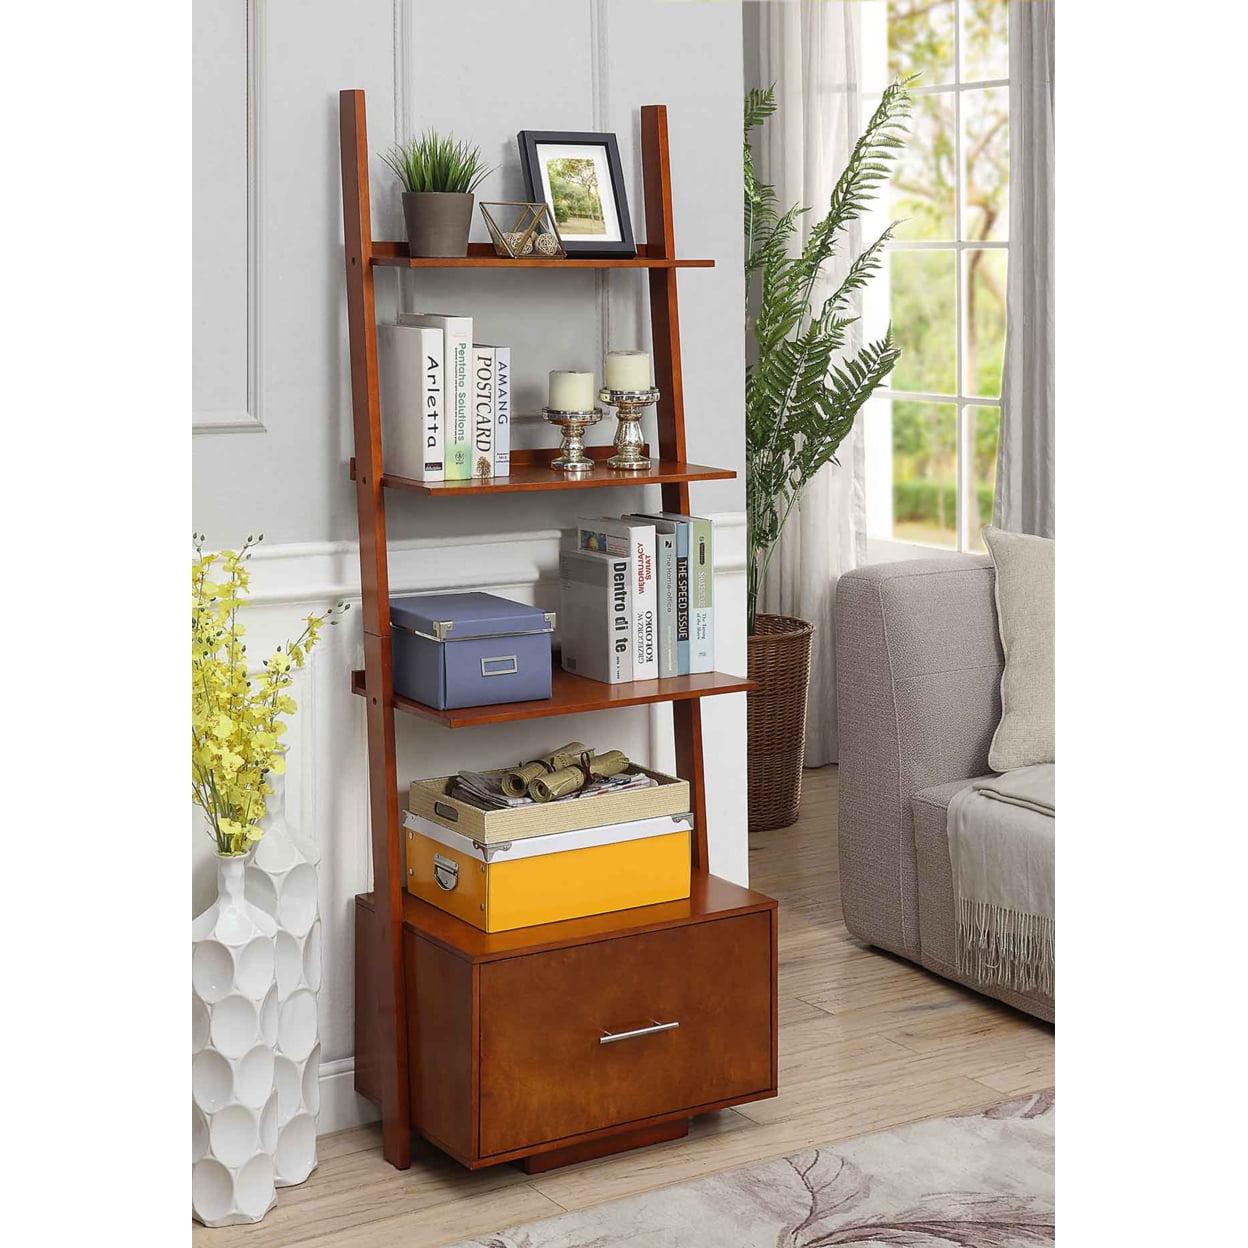 Espresso Wood Ladder Bookcase with File Drawer, 69"